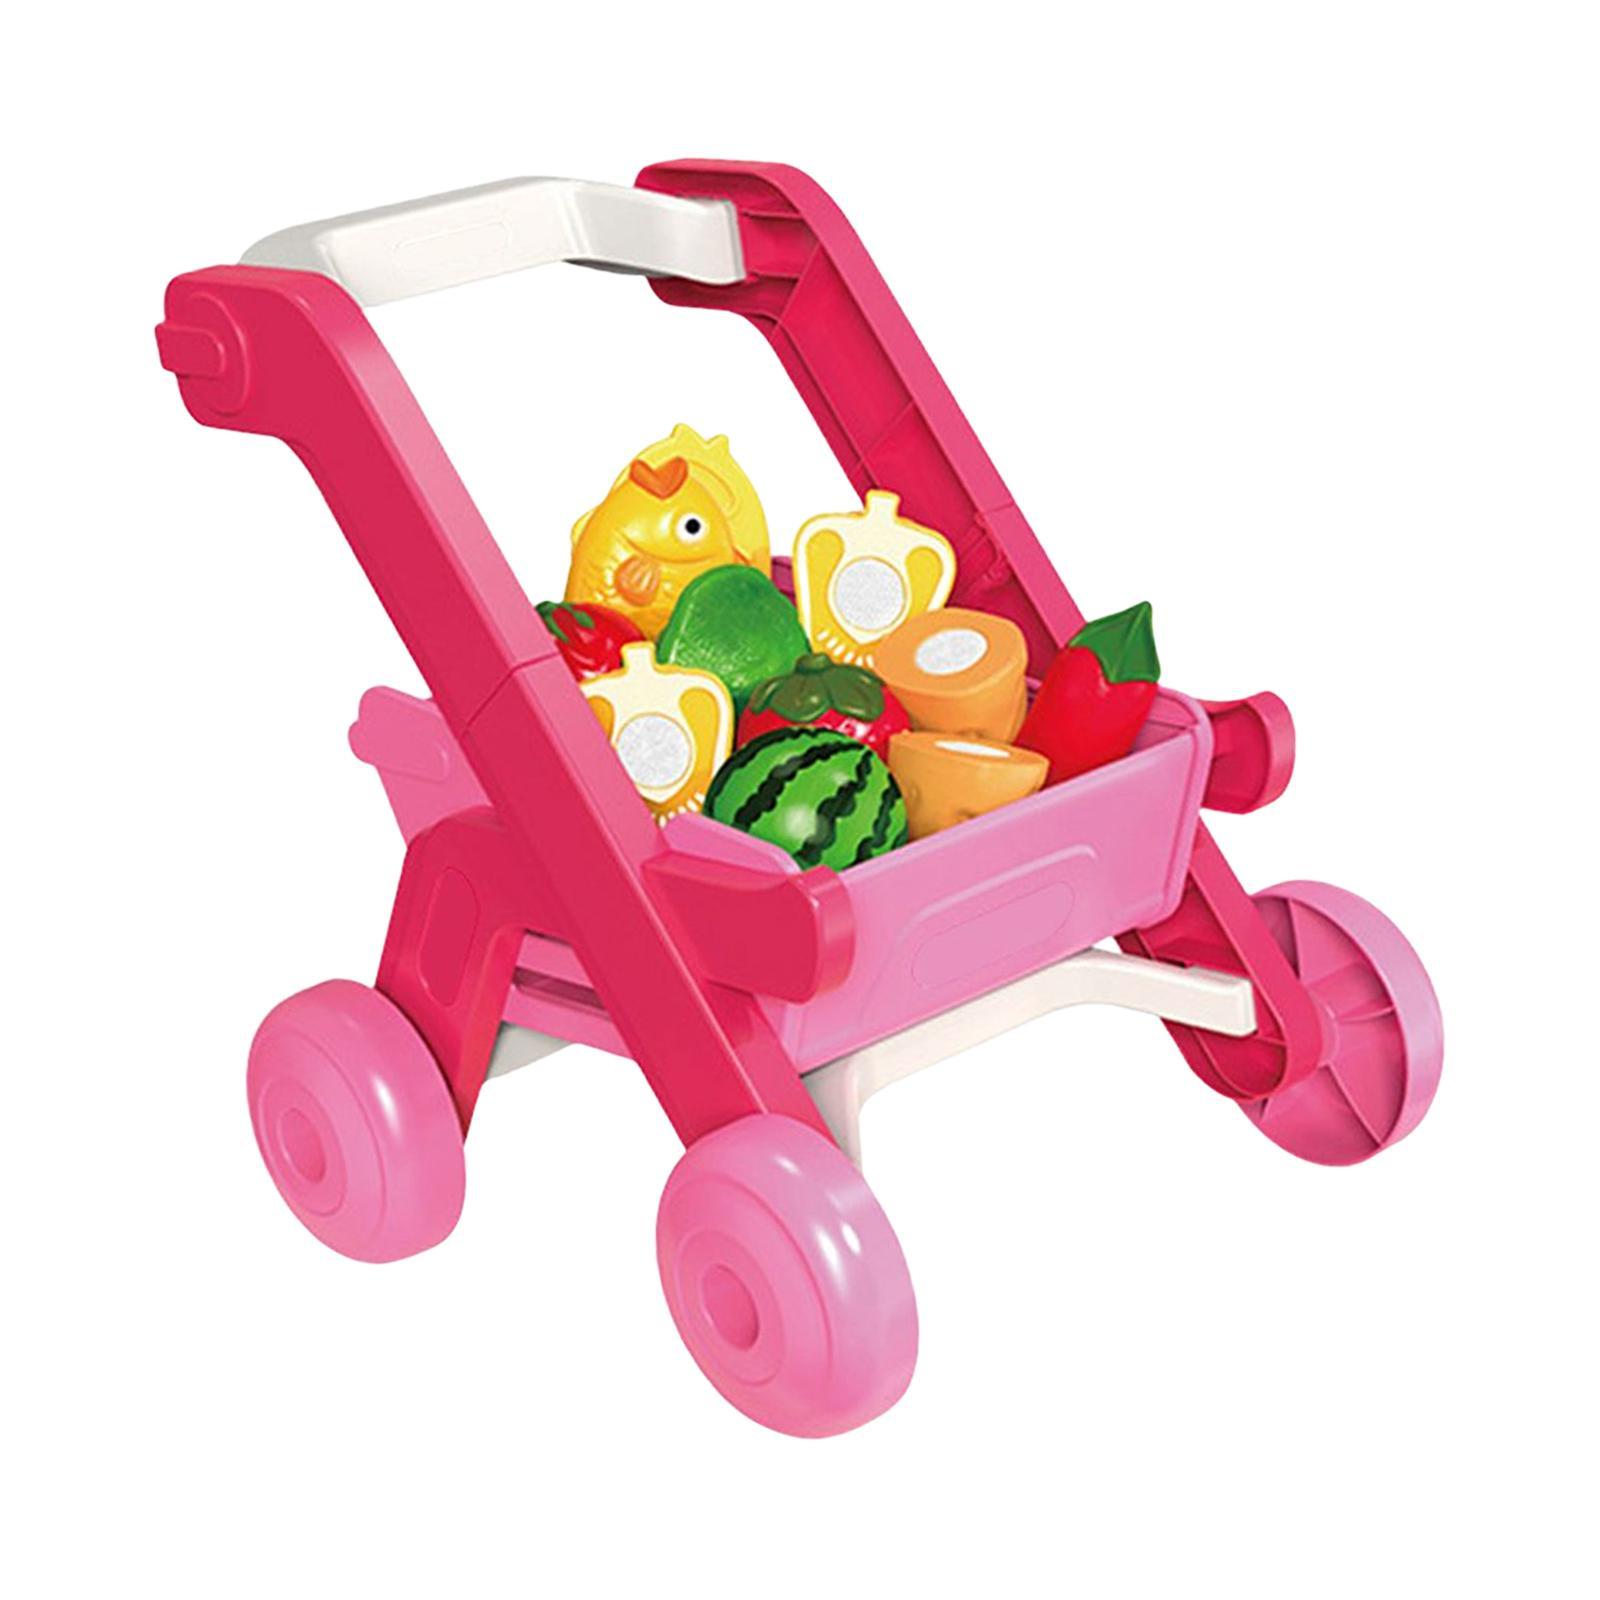 Shopping Trolley Cart kids Shopping Cart Toy Pretend Play Gifts